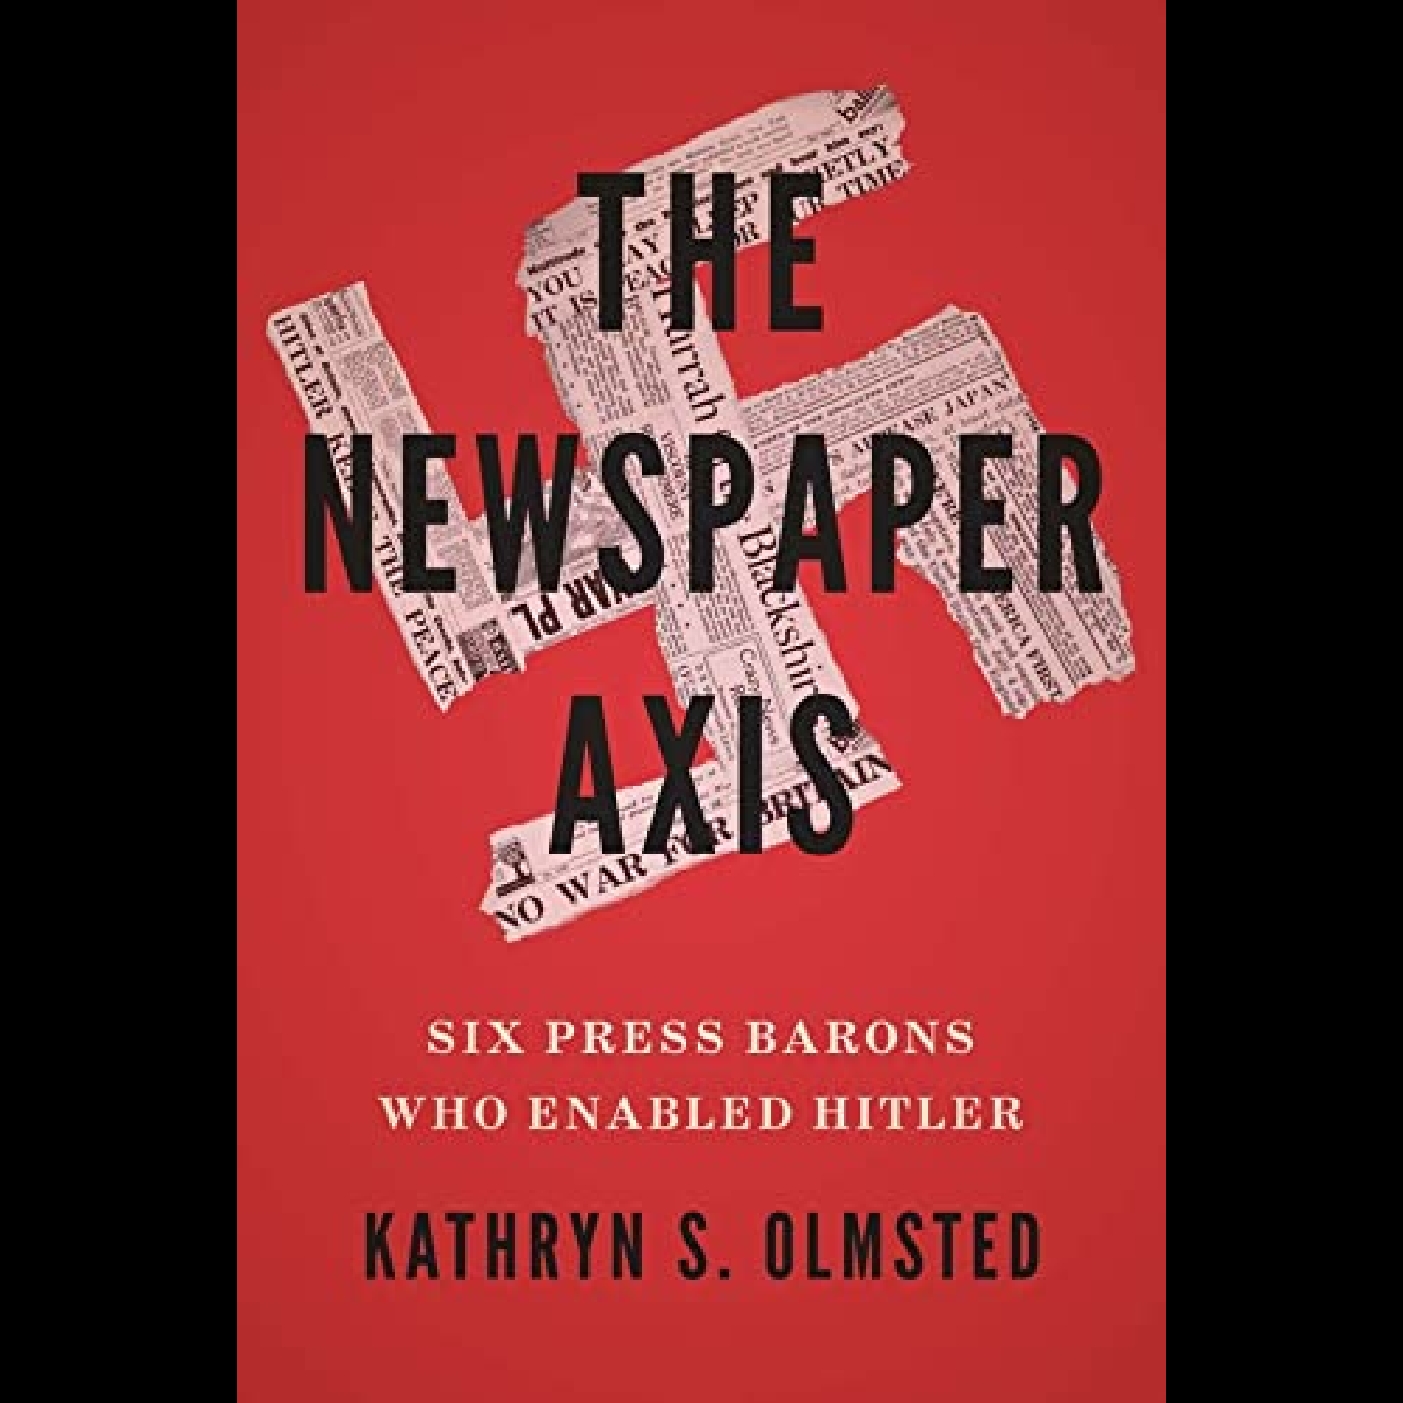 The Newspaper Axis - Six Press Barons Who Enabled Hitler - Professor Kathryn Olmsted